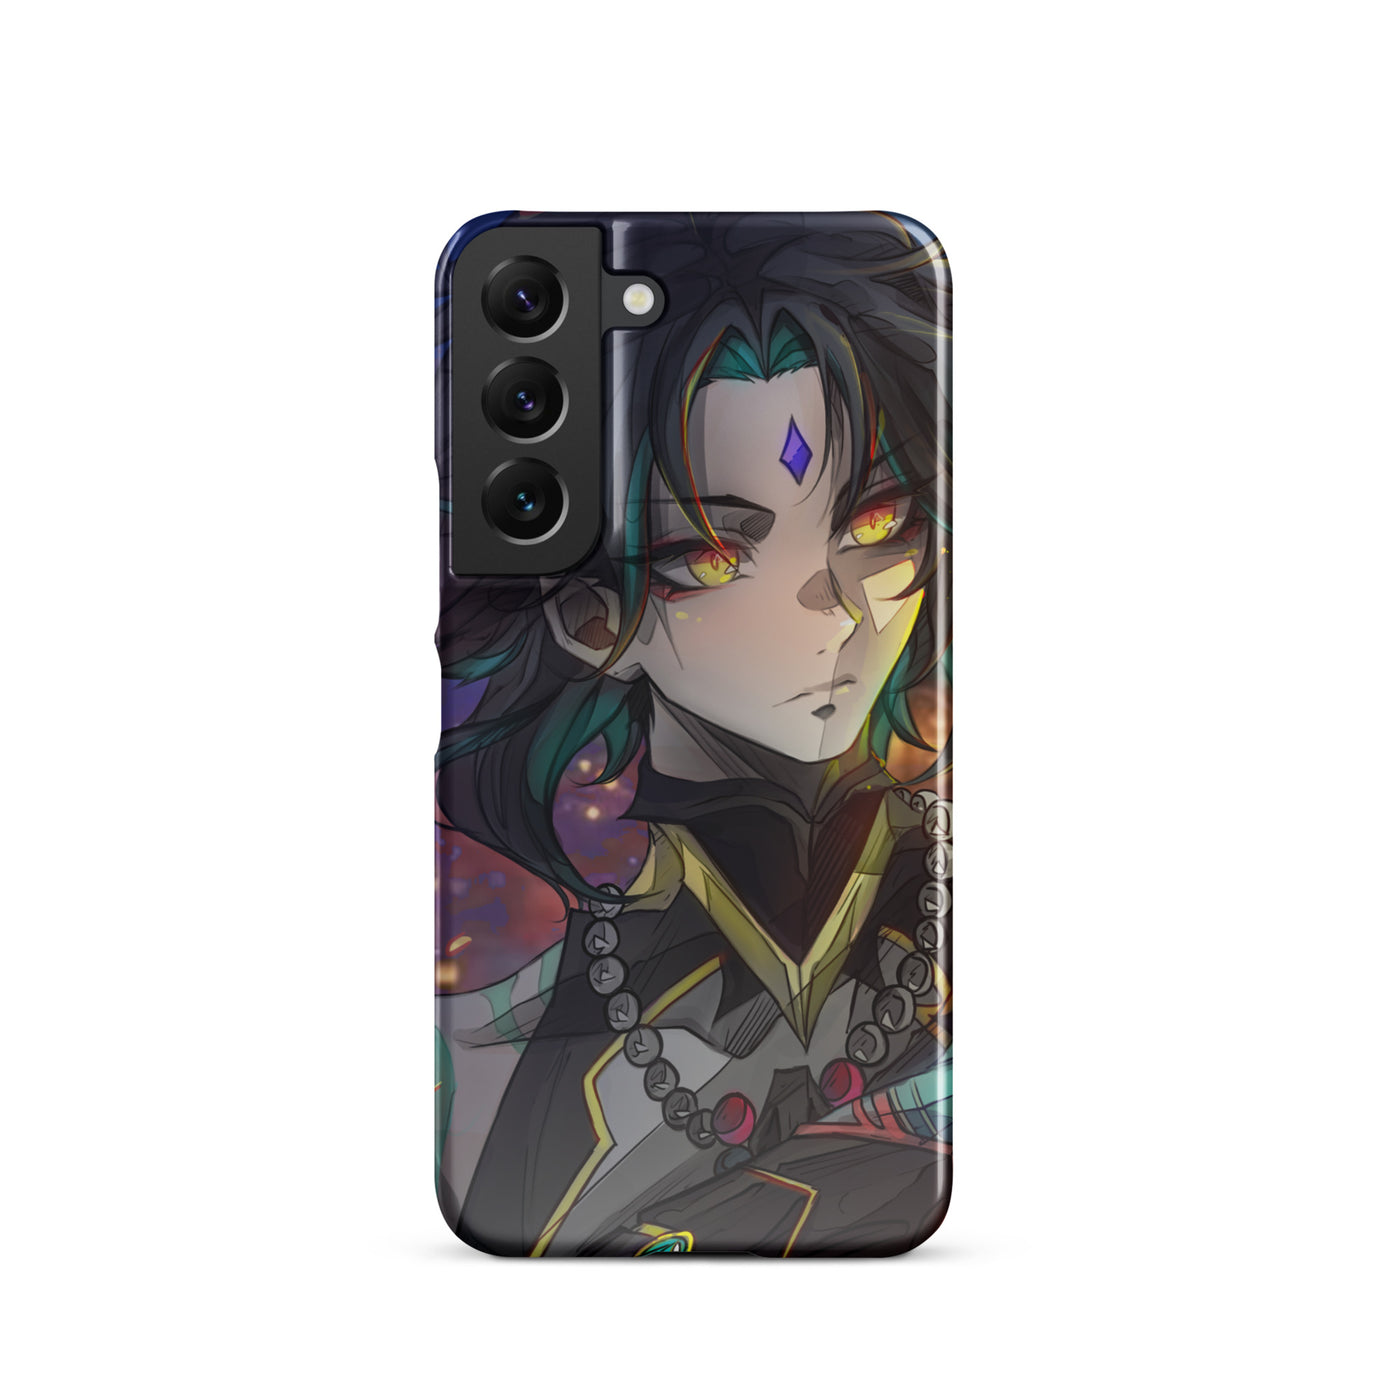 Xiao from Genshin Impact case for Samsung®